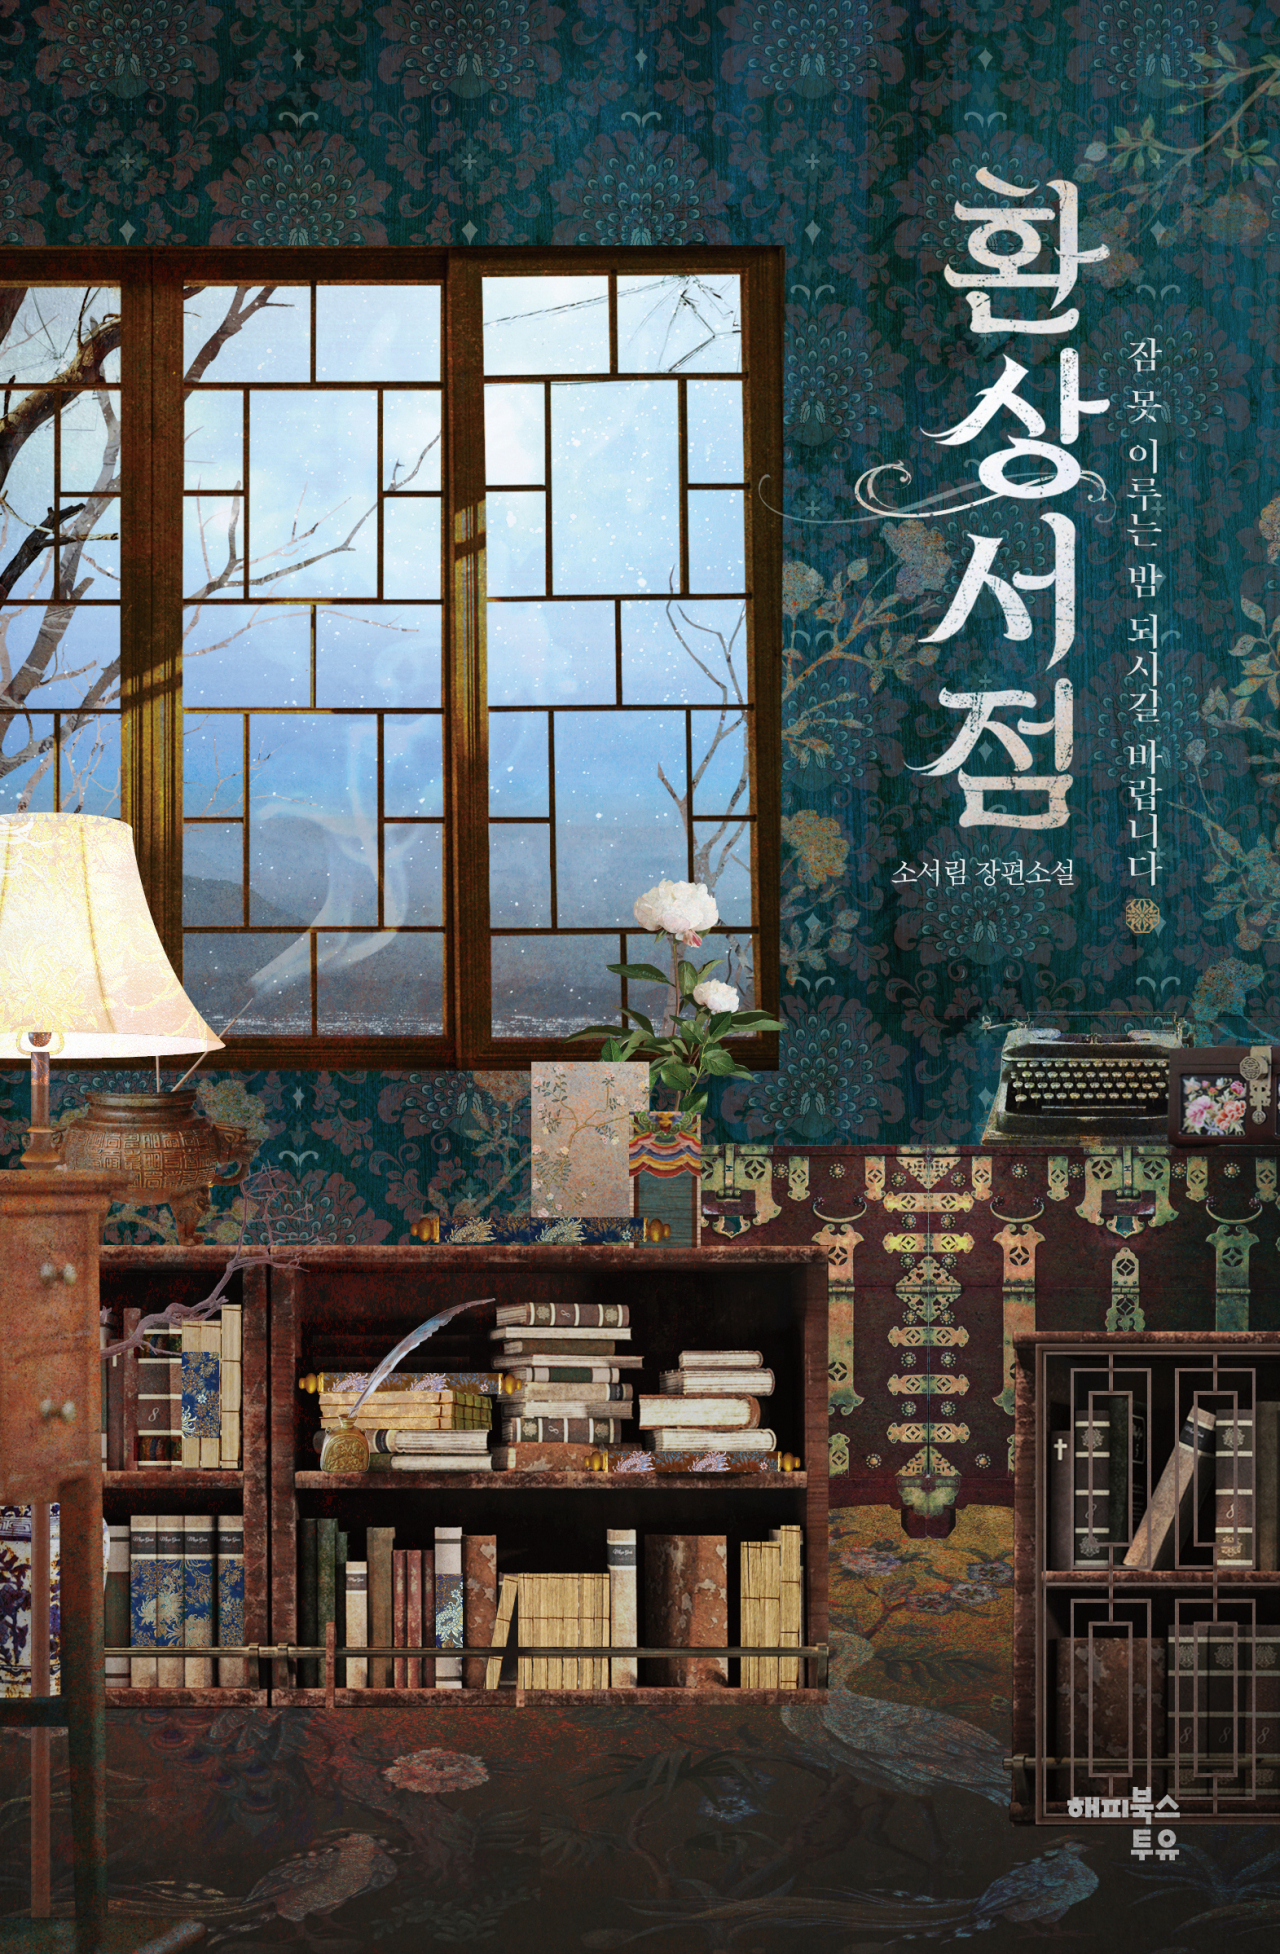 “The Bookstore of Illusion” by So Seo-rim (Happy Books To You)